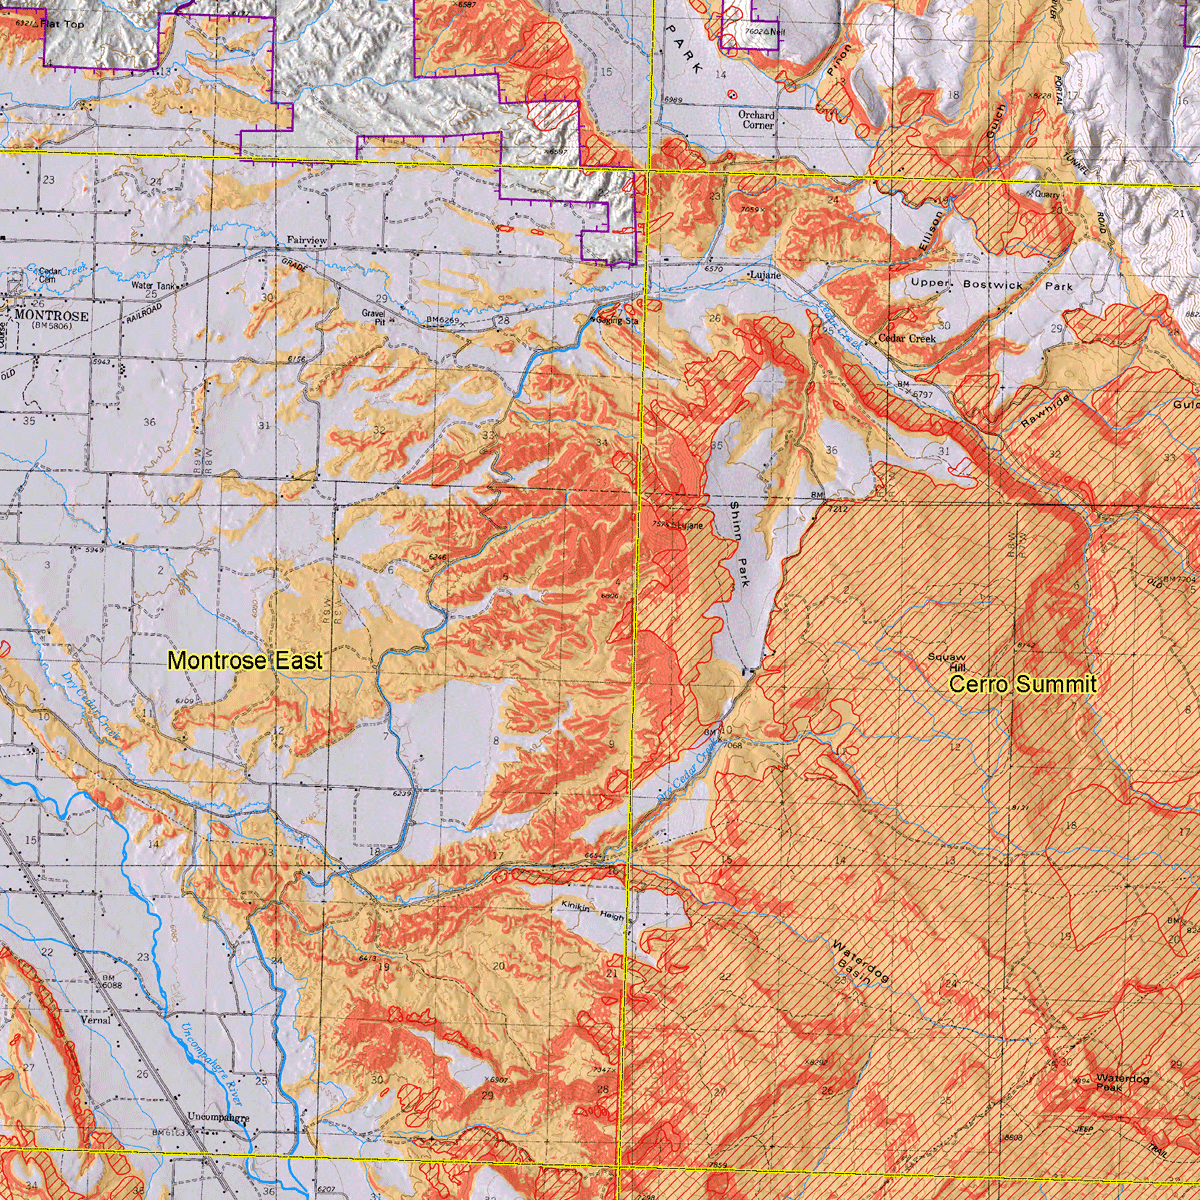 OF-09-01 Geologic Hazards Mapping Project of the Uncompahgre River Valley Area, Montrose County, Colorado